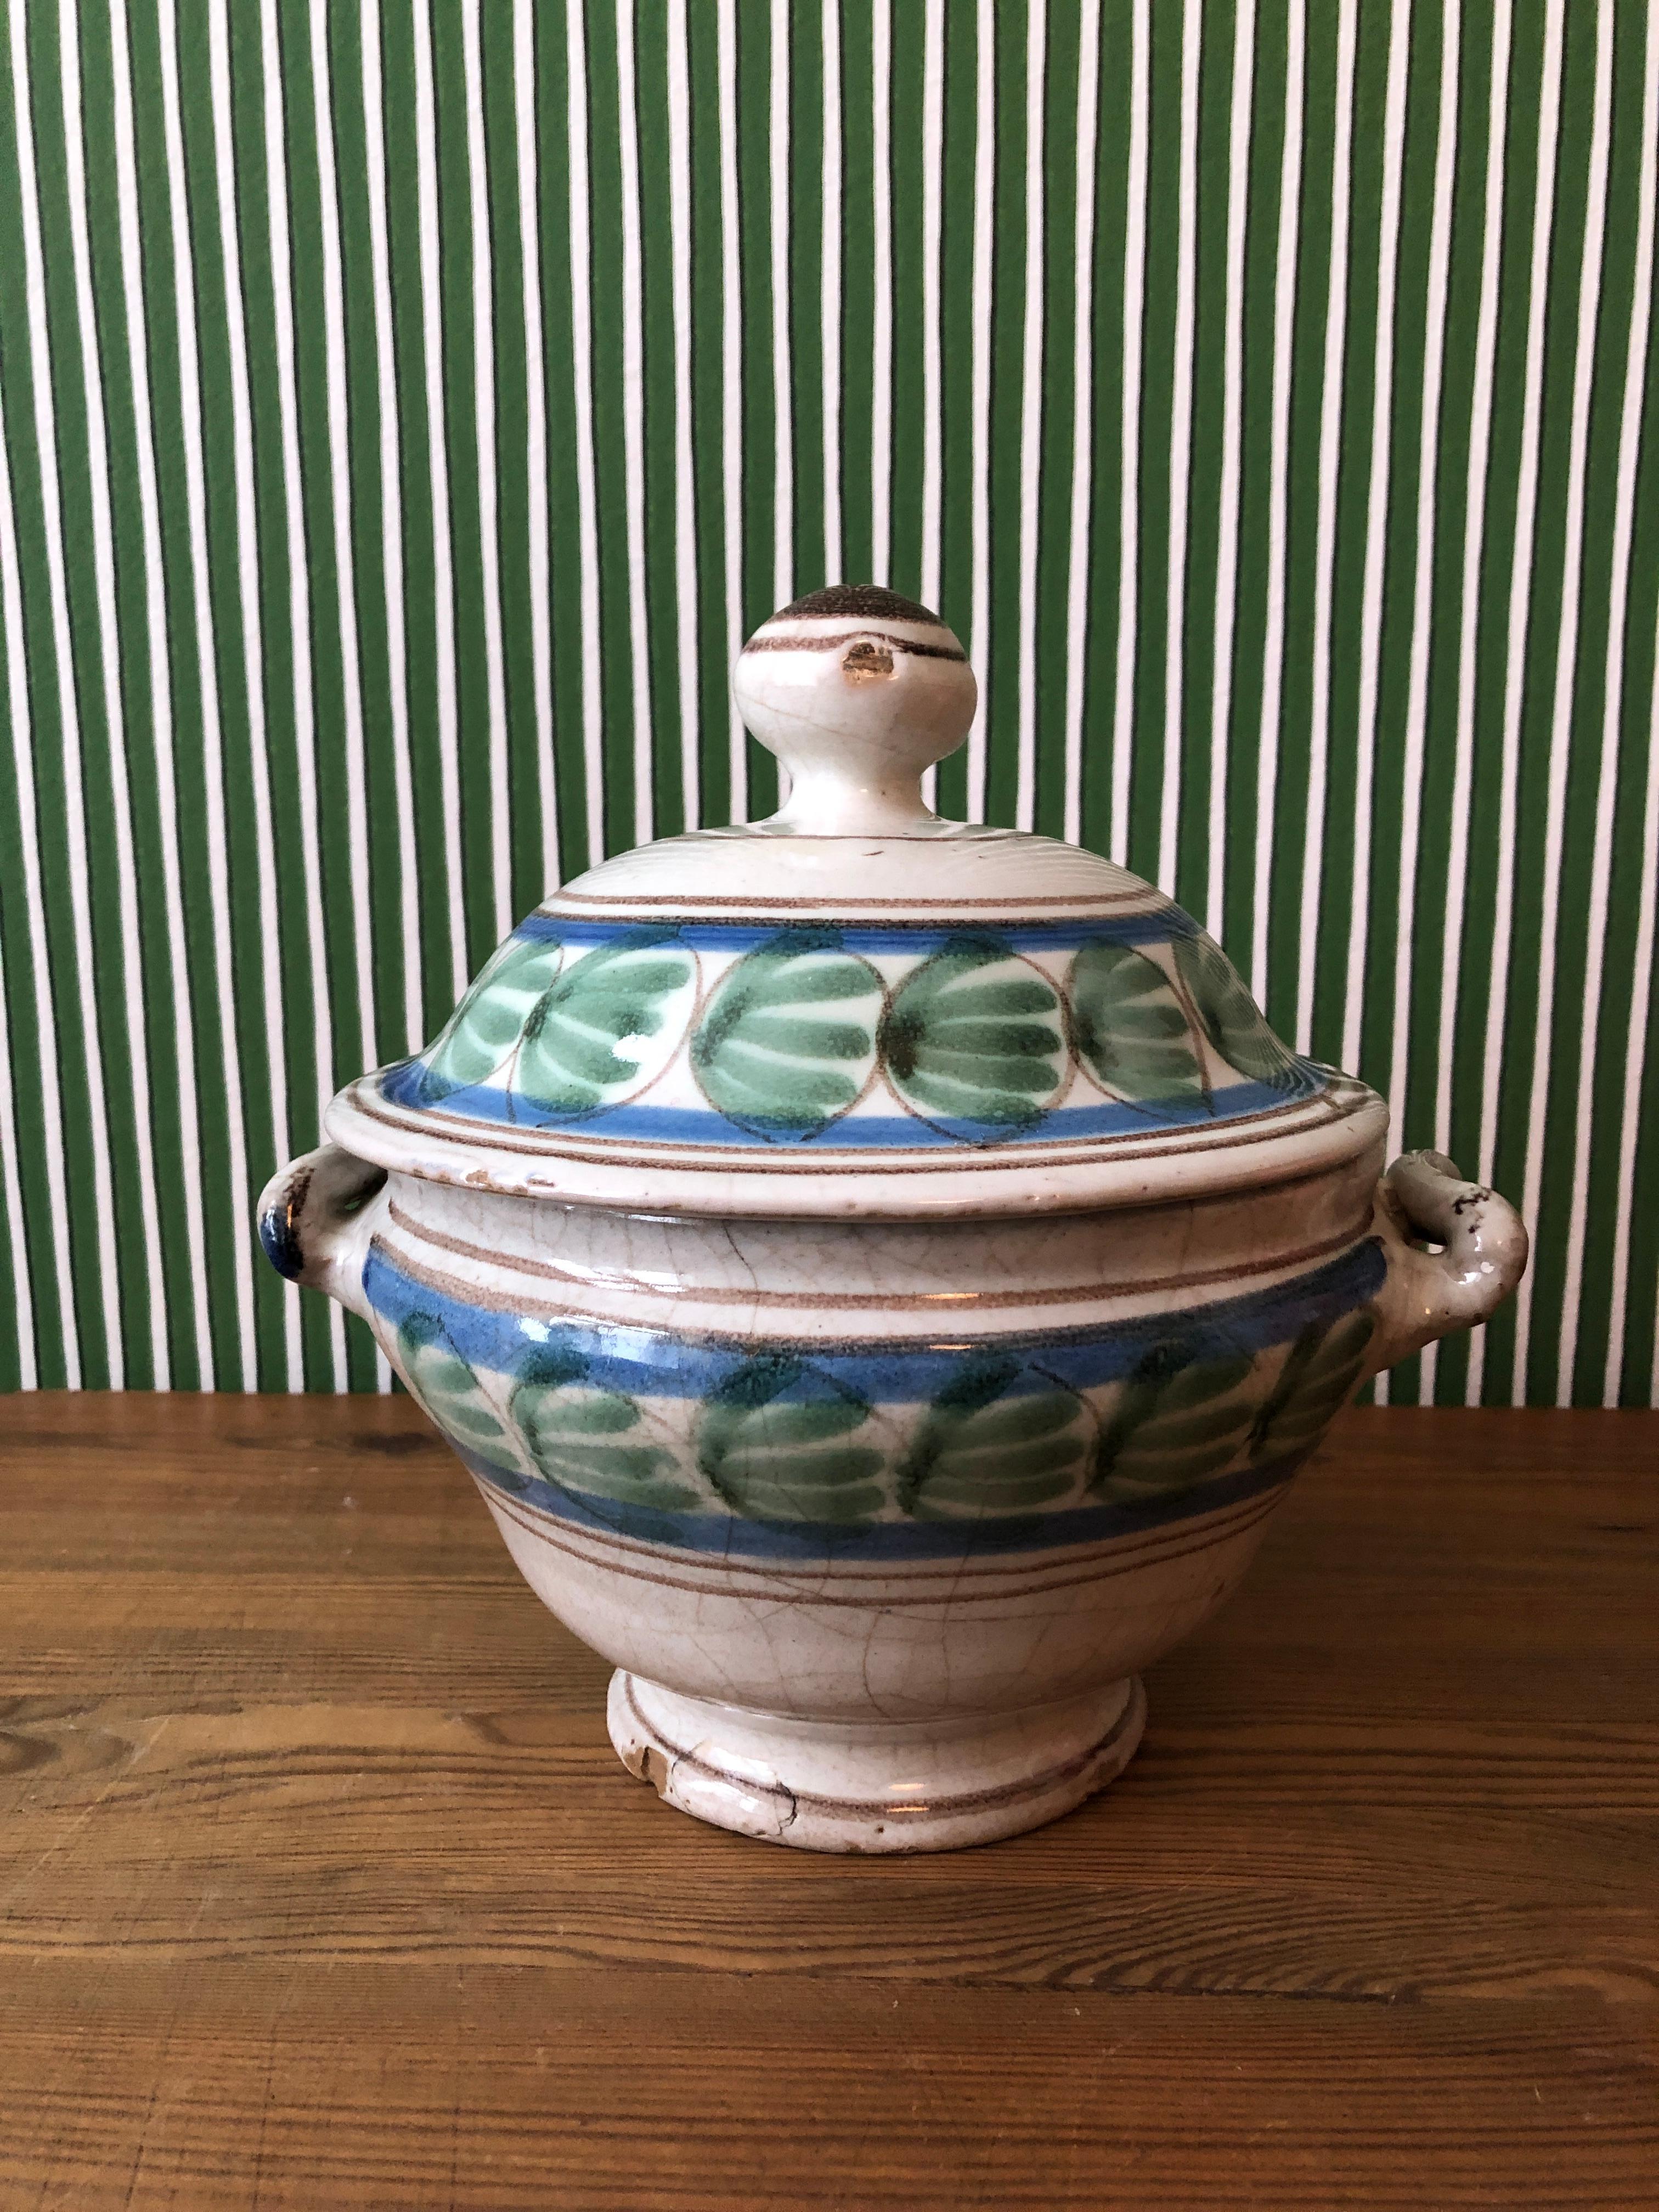 Italian Vintage Vietri Ceramic Tureen with Blue and Green Glace, Italy Late 19th Century